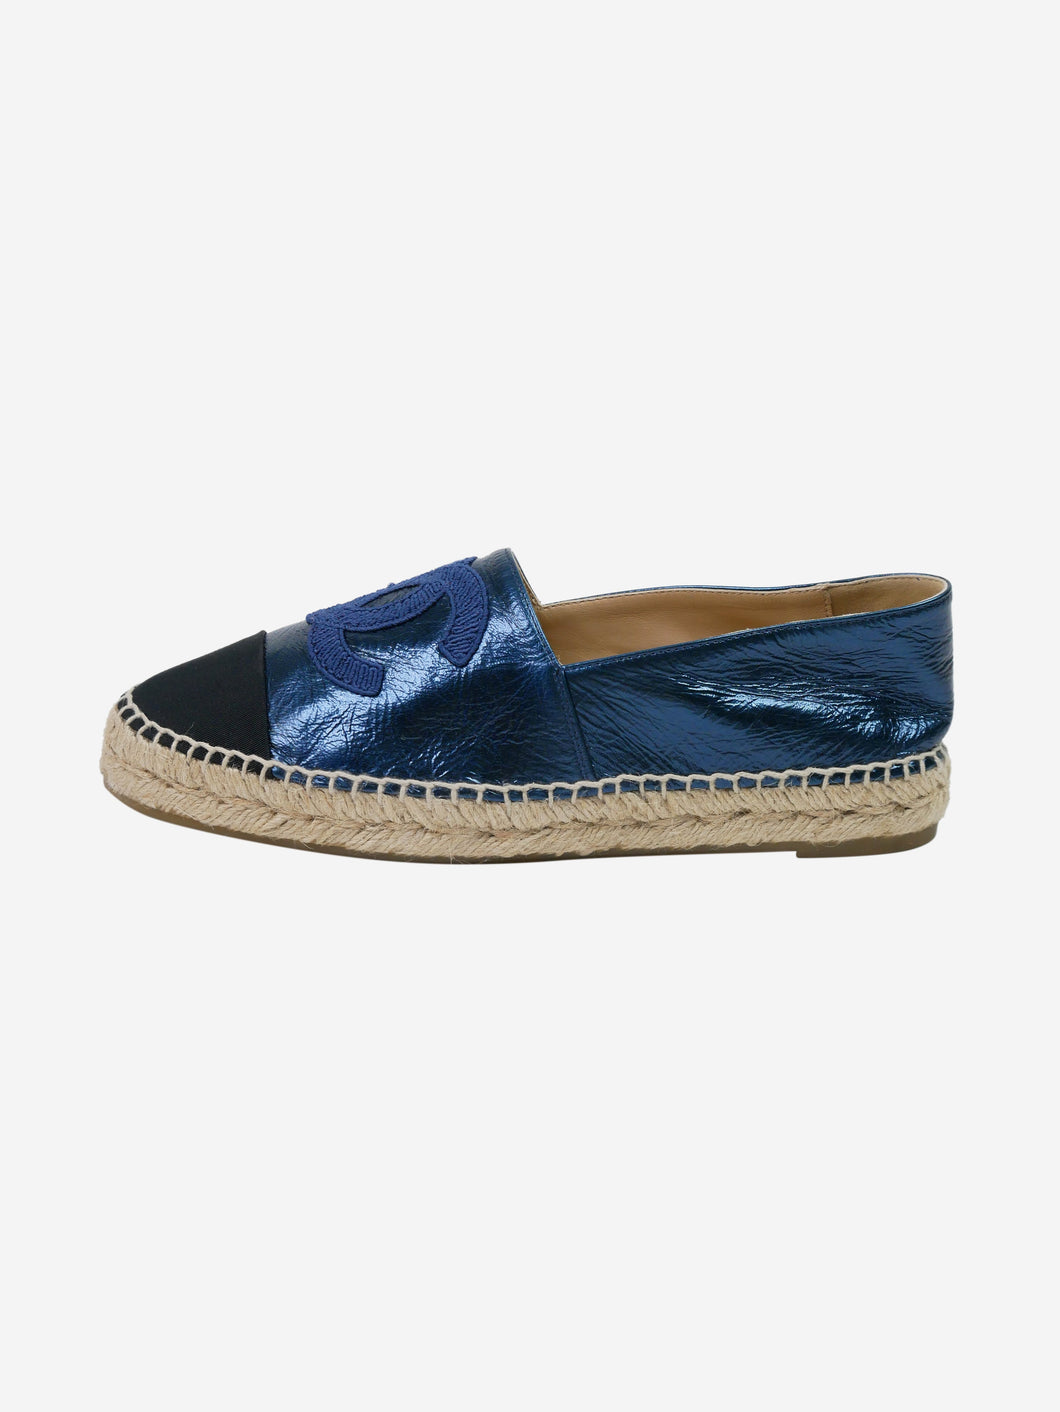 Blue CC espadrilles with contrasted stitching - size EU 39 Shoes Chanel 